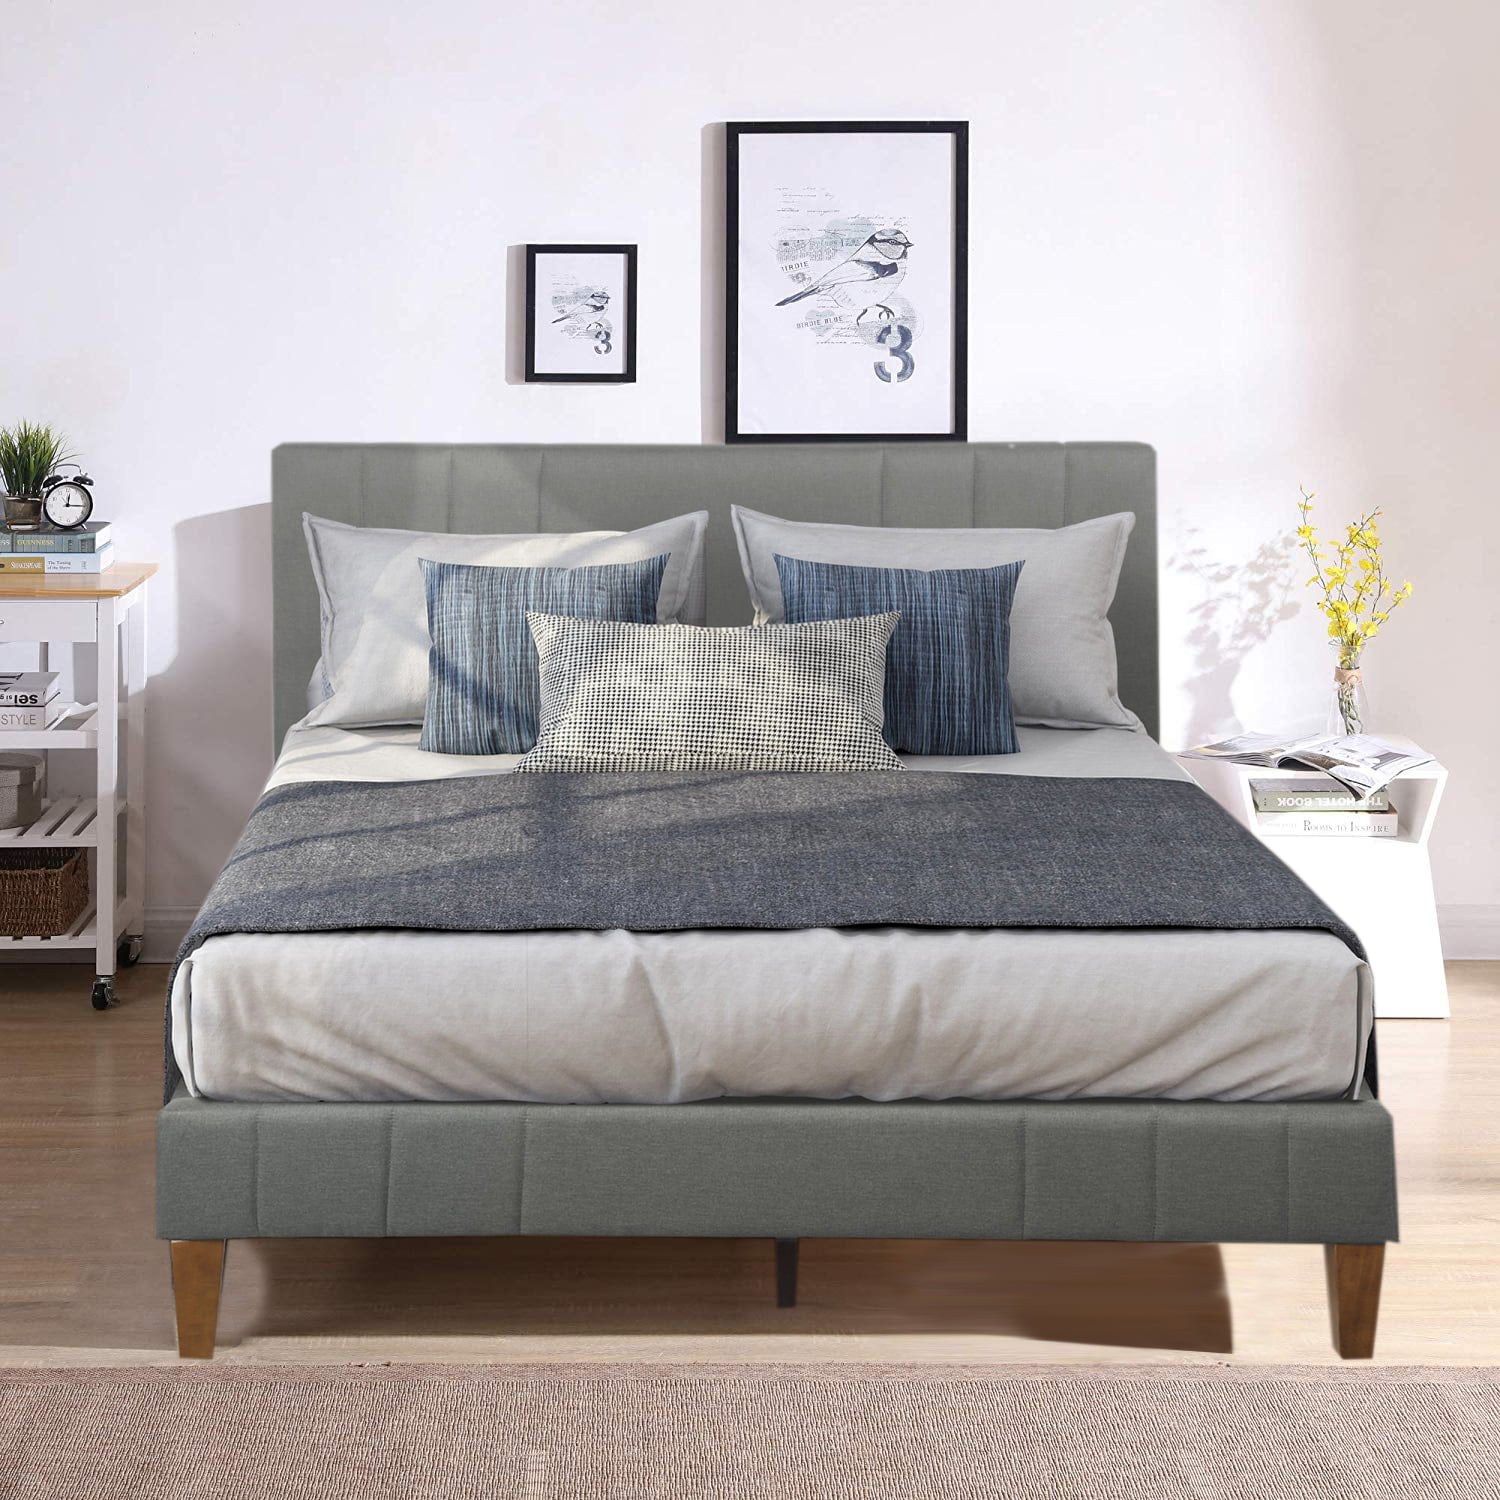 Queen Bed Frame No Box Spring Needed, Full Size Bed Frame With Headboard And Box Spring